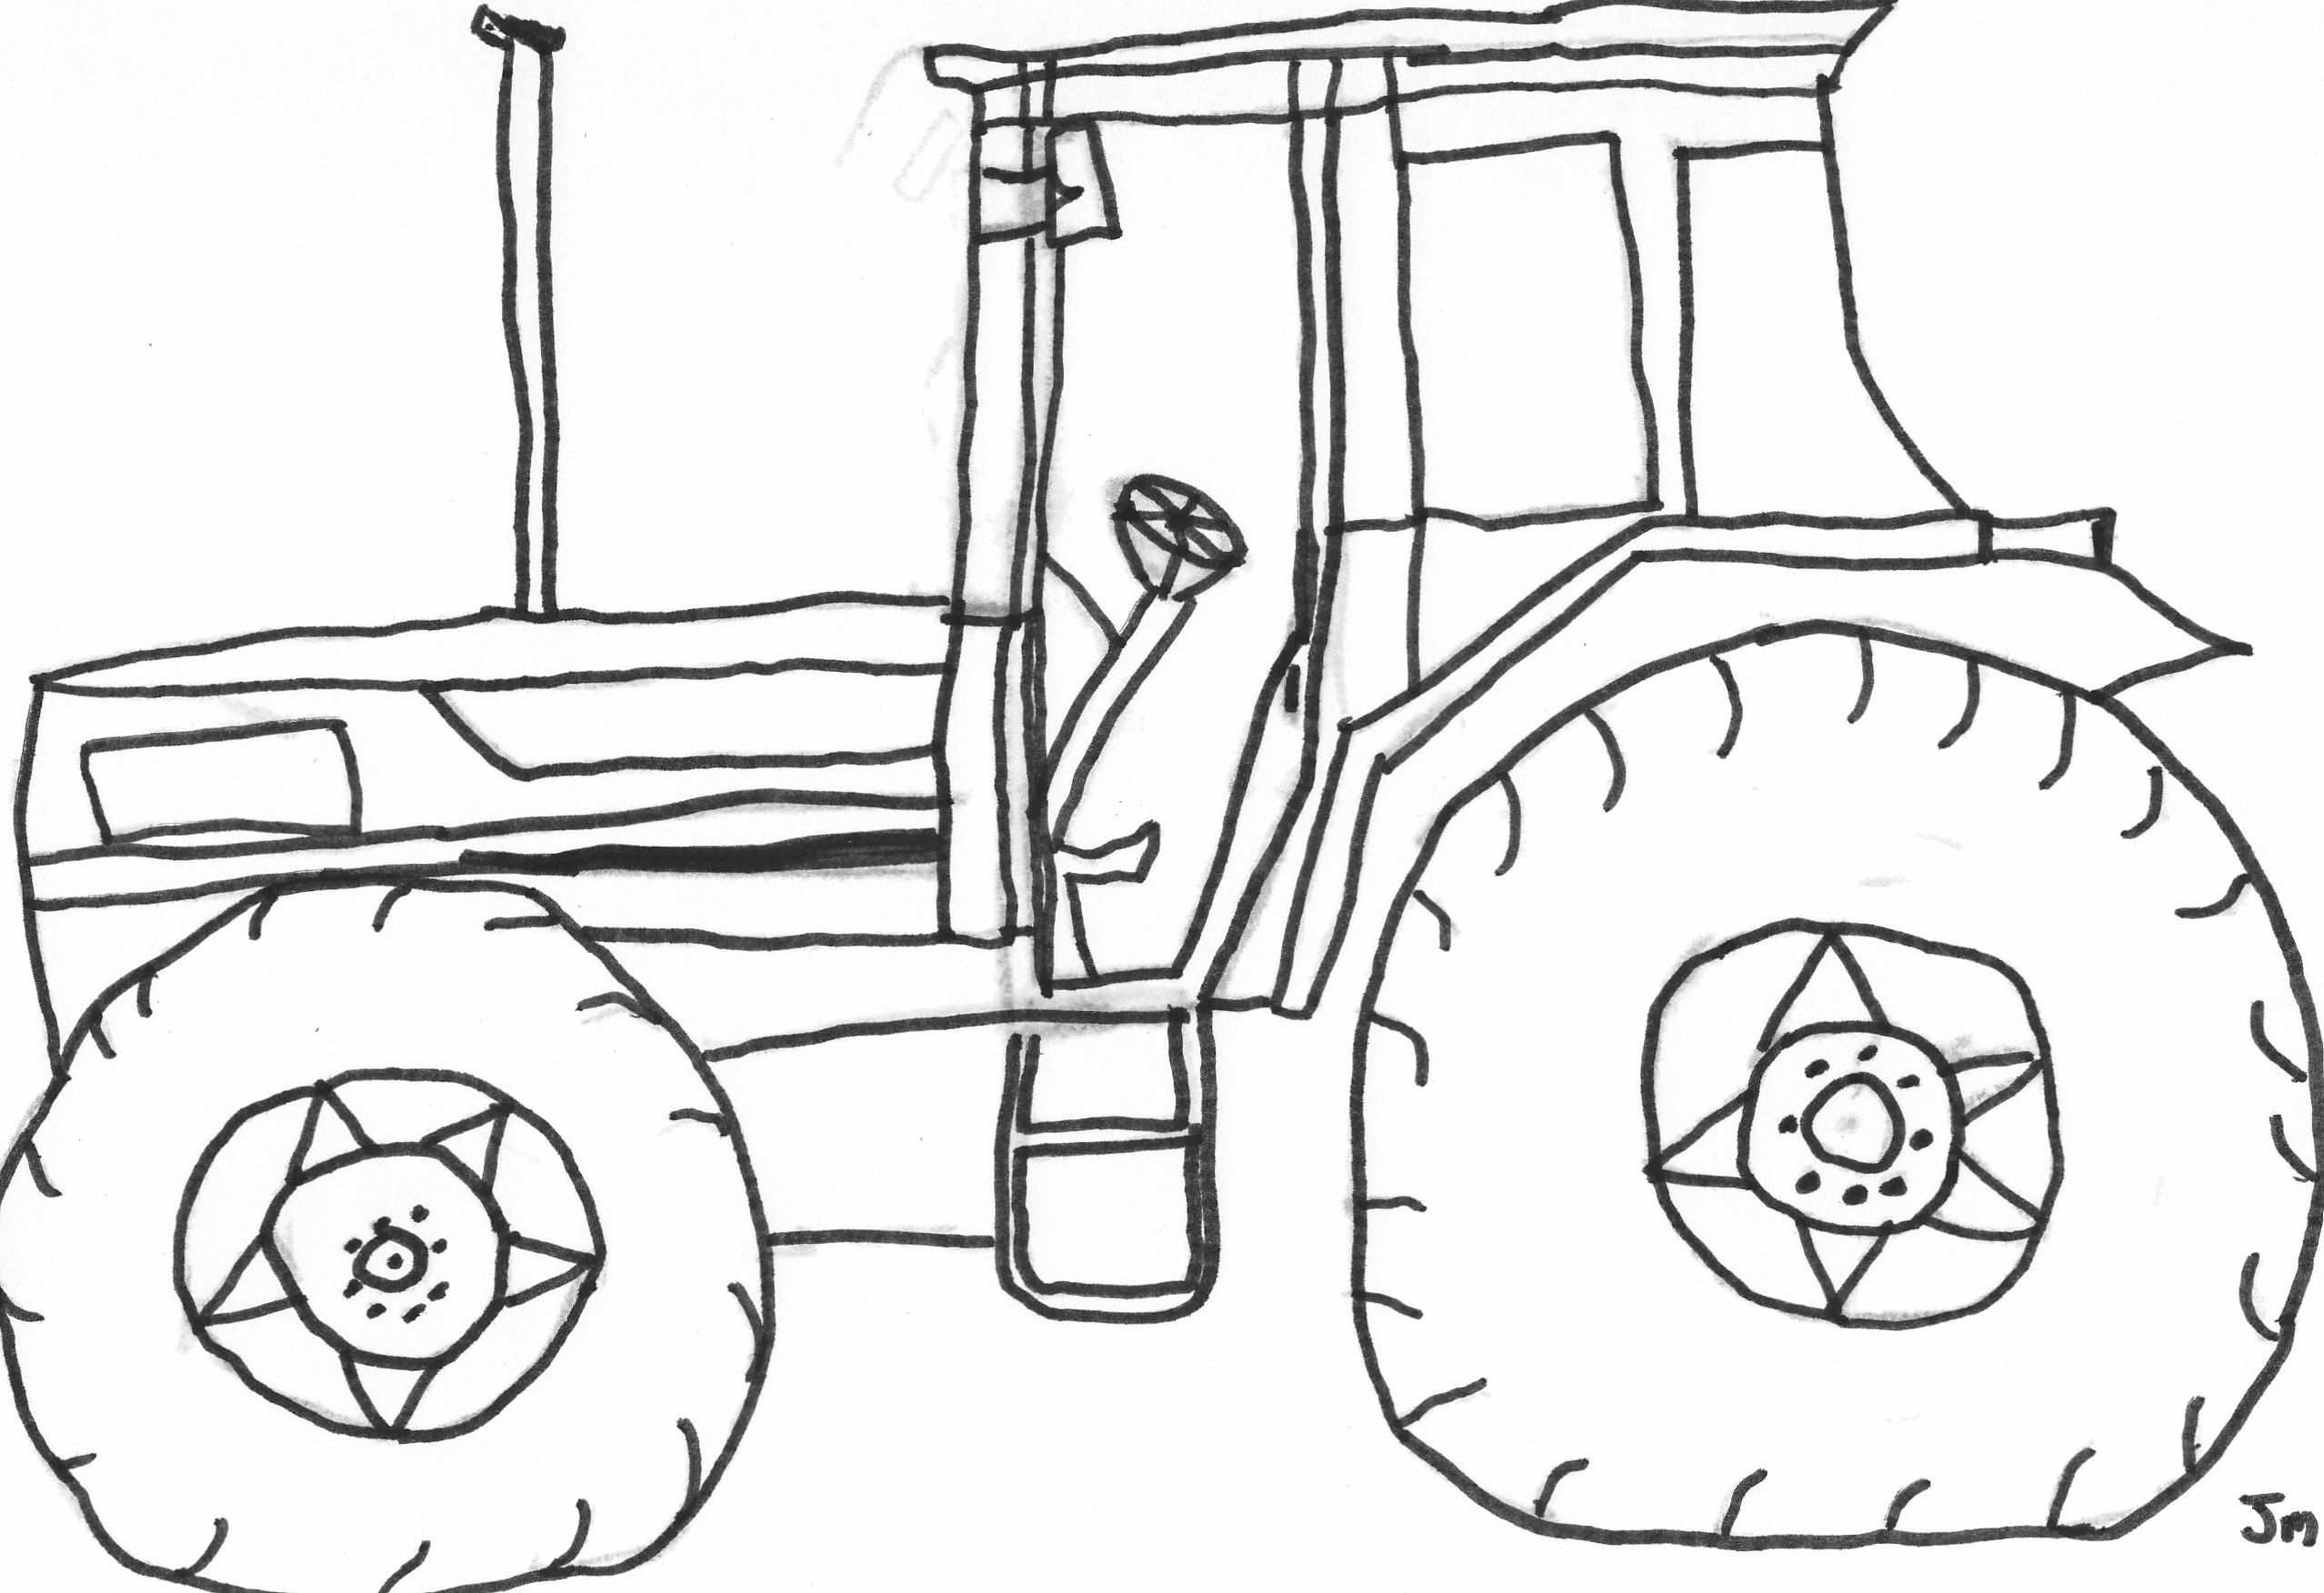 Tractor Coloring Page Two Preview Maleboger Traktor